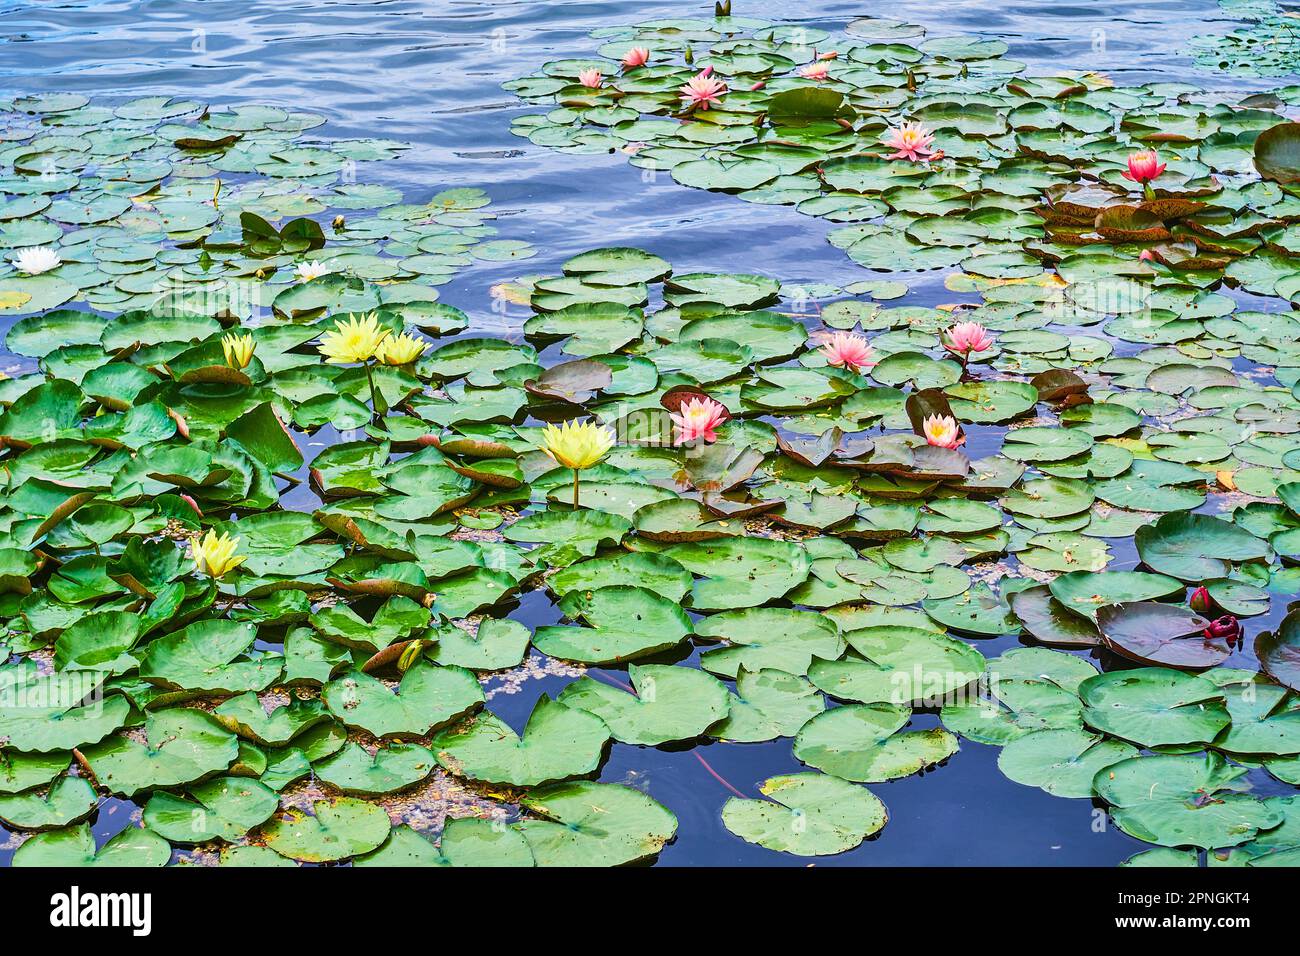 Nymphaea aquatic plants with flowers of different colors and bright green leaves on the lake: Nymphaea Mexicana (yellow), Nymphaea Escarboucle (pink) Stock Photo